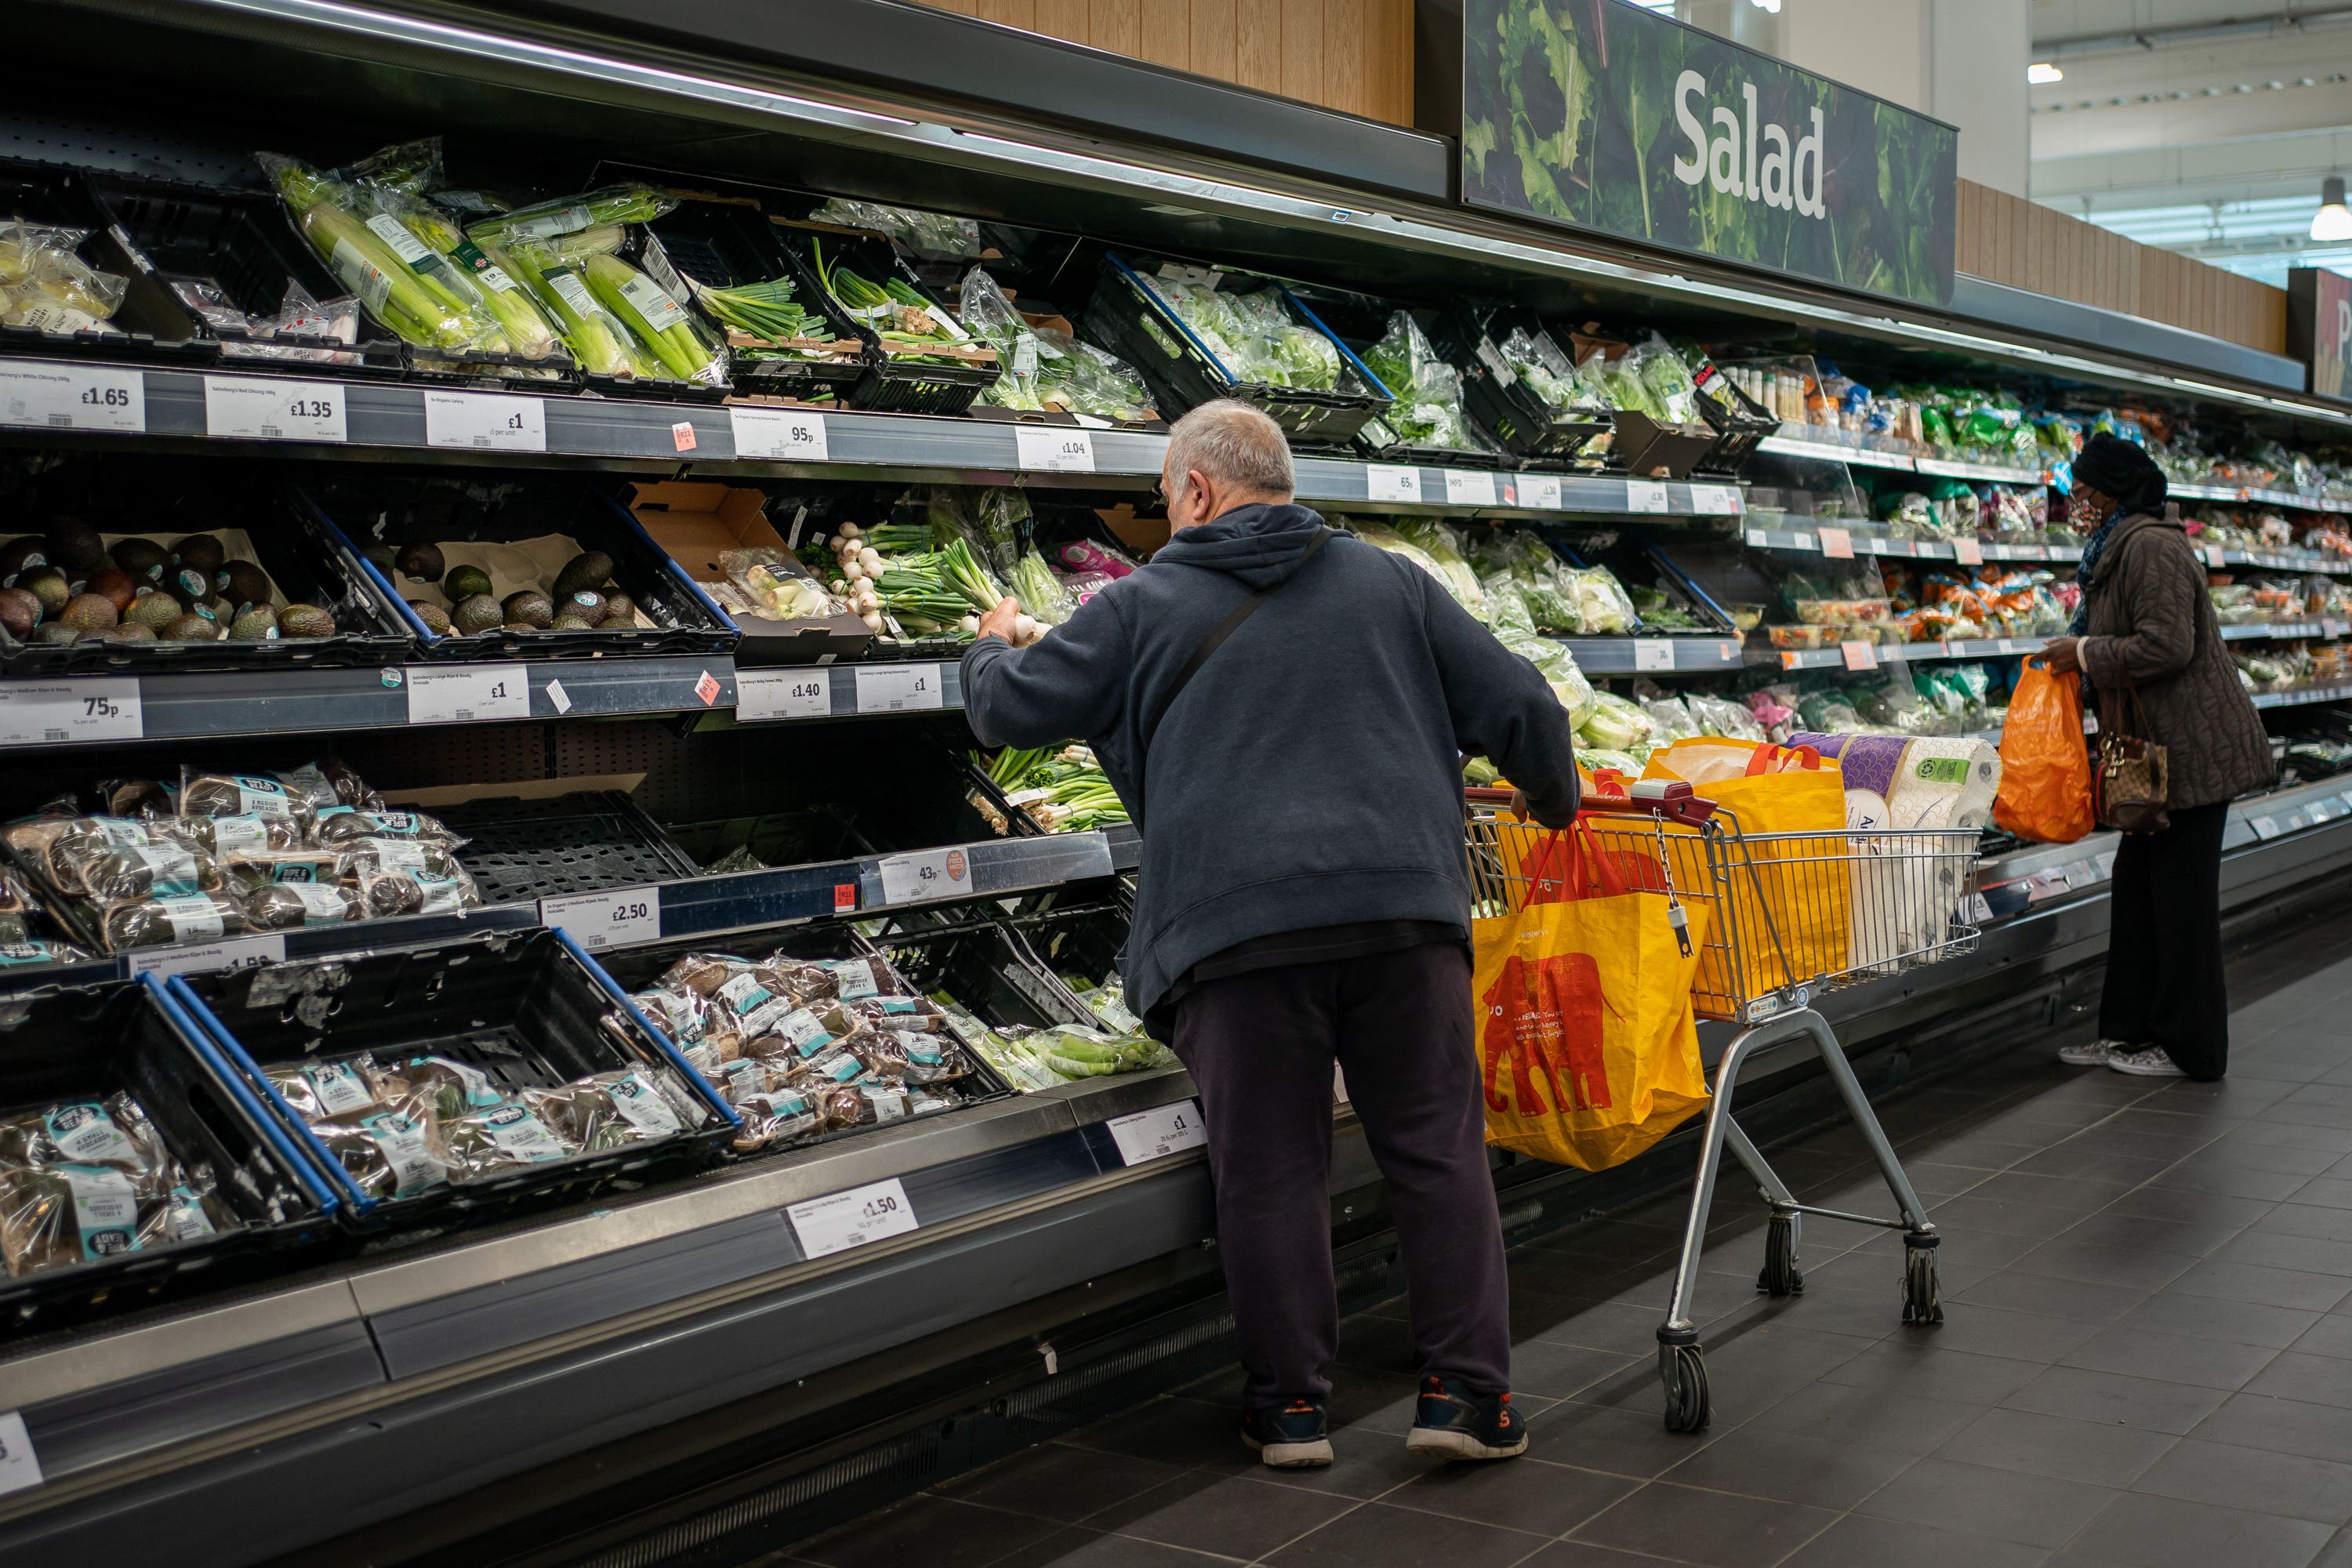 UK inflation eased last month, but households remain under pressure